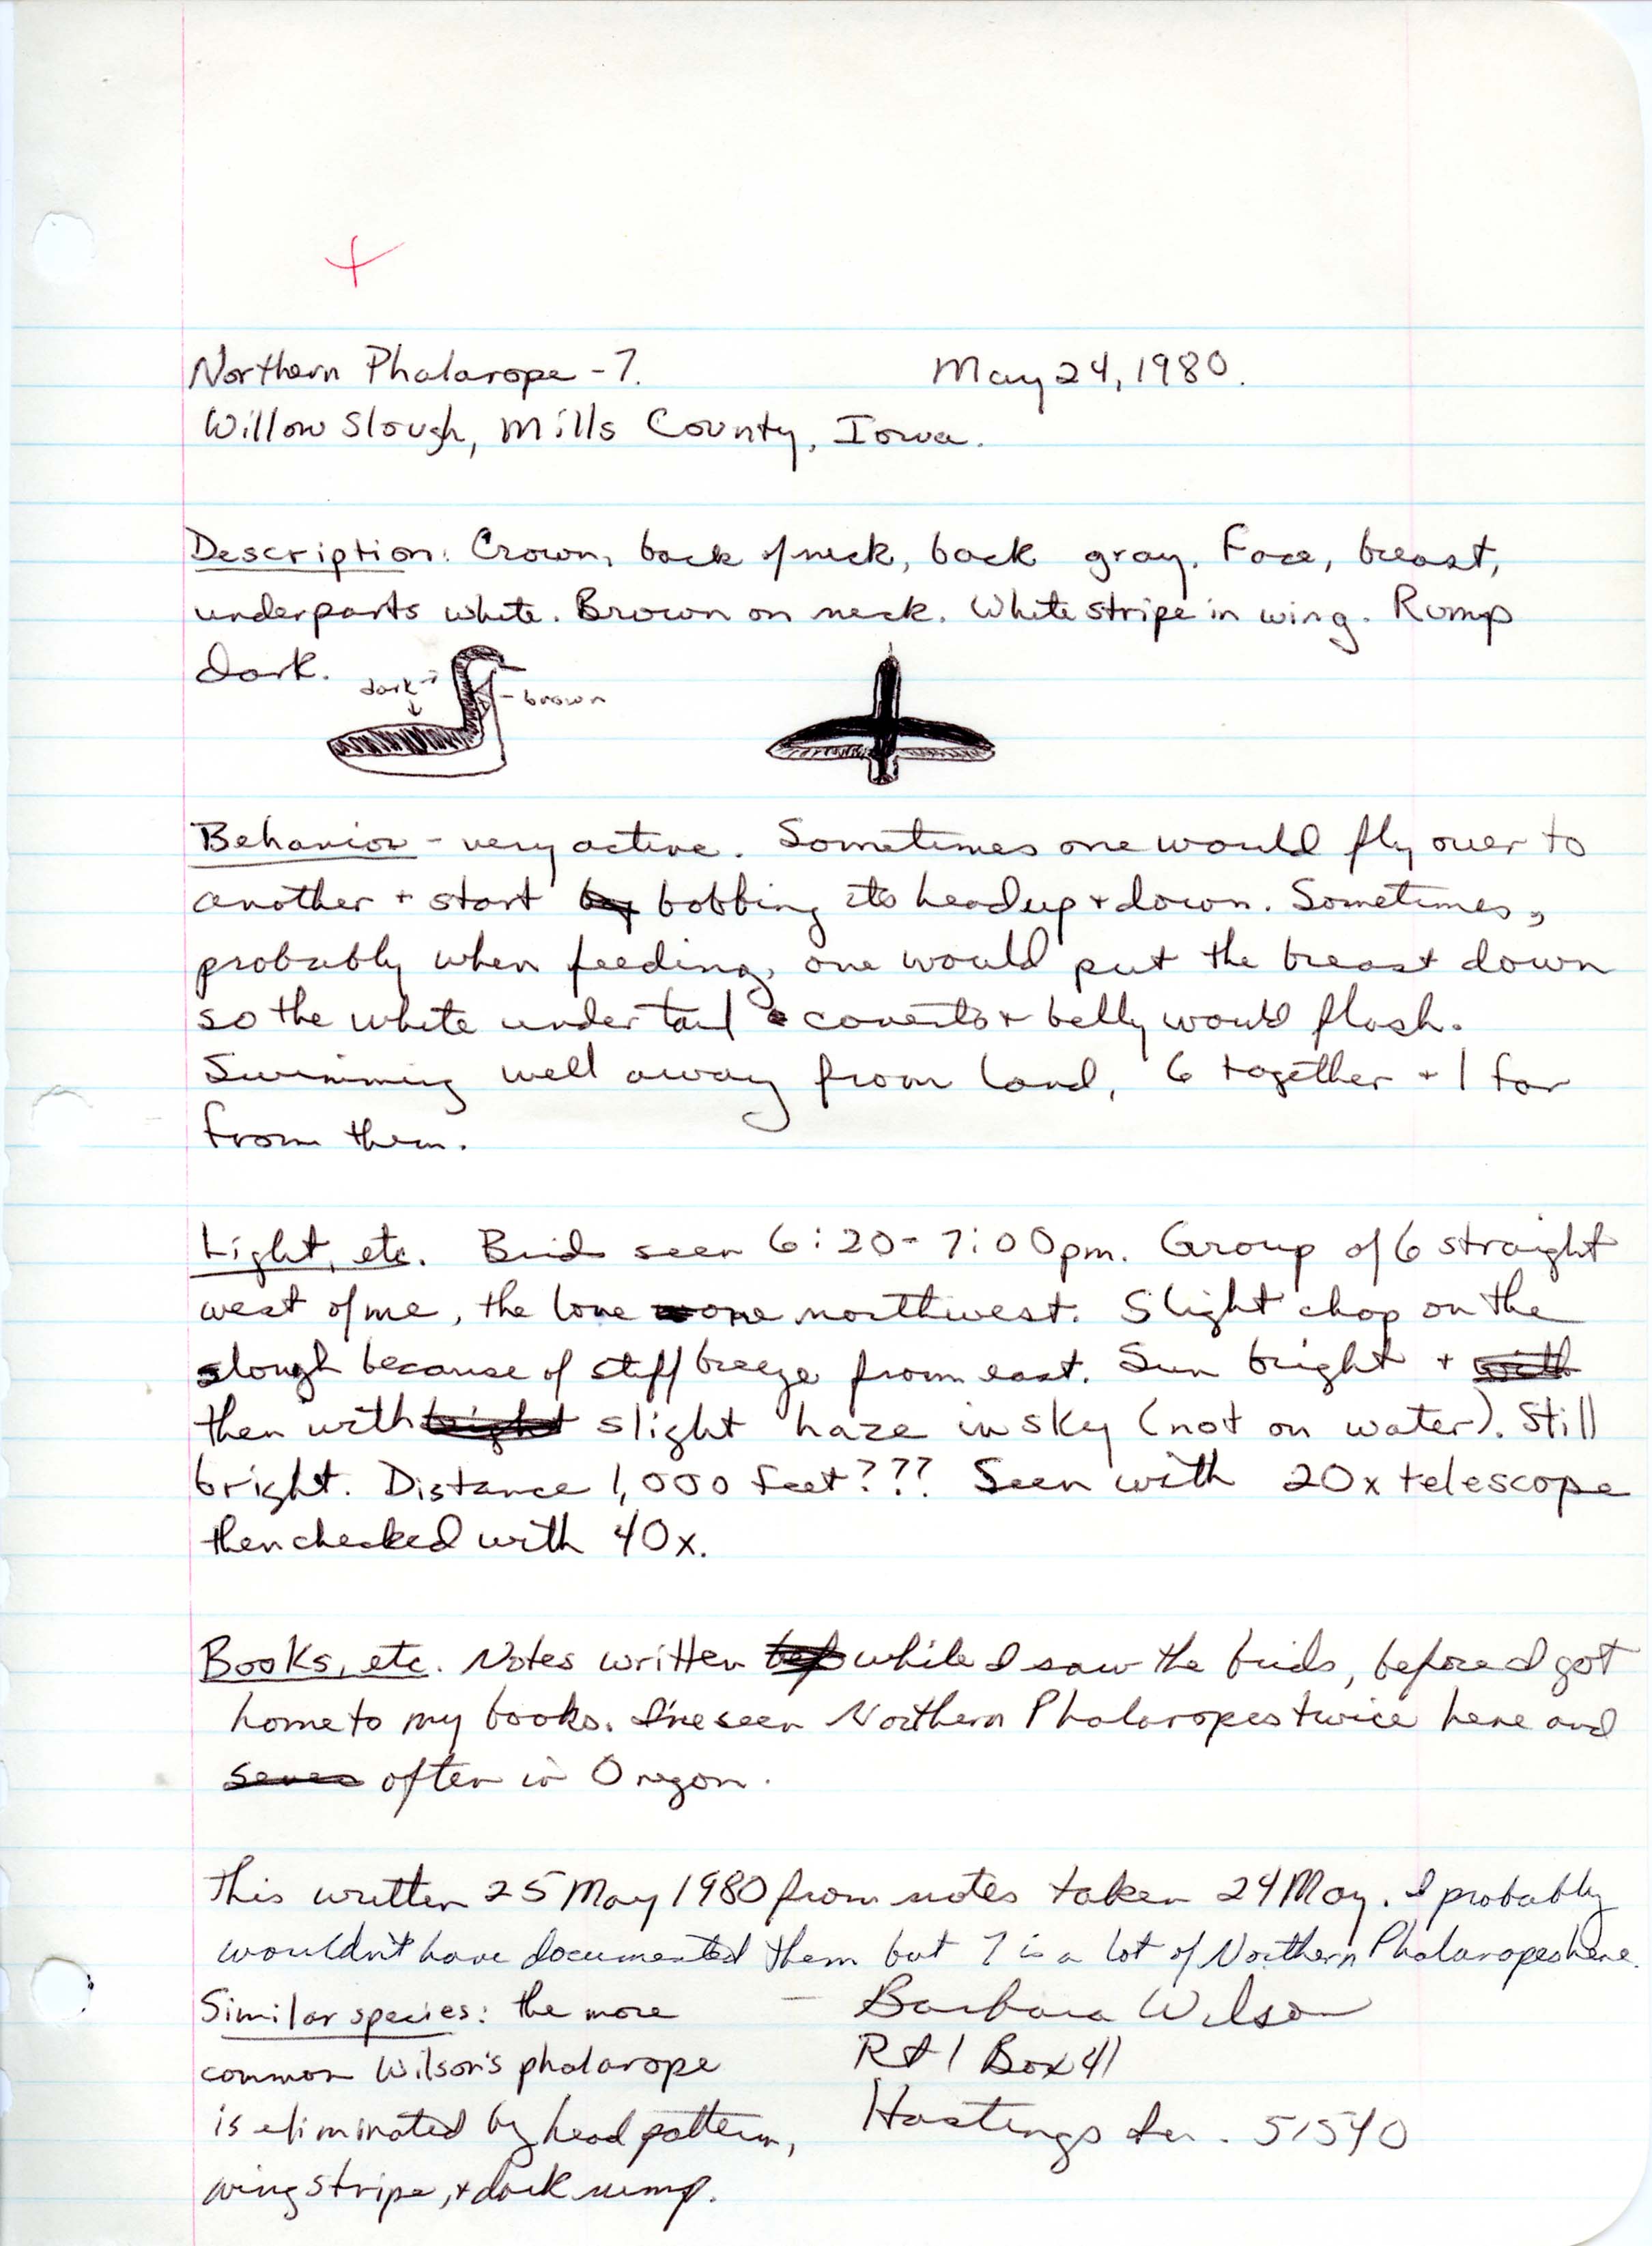 Rare bird documentation form for Red-necked Phalarope at Willow Slough, 1980